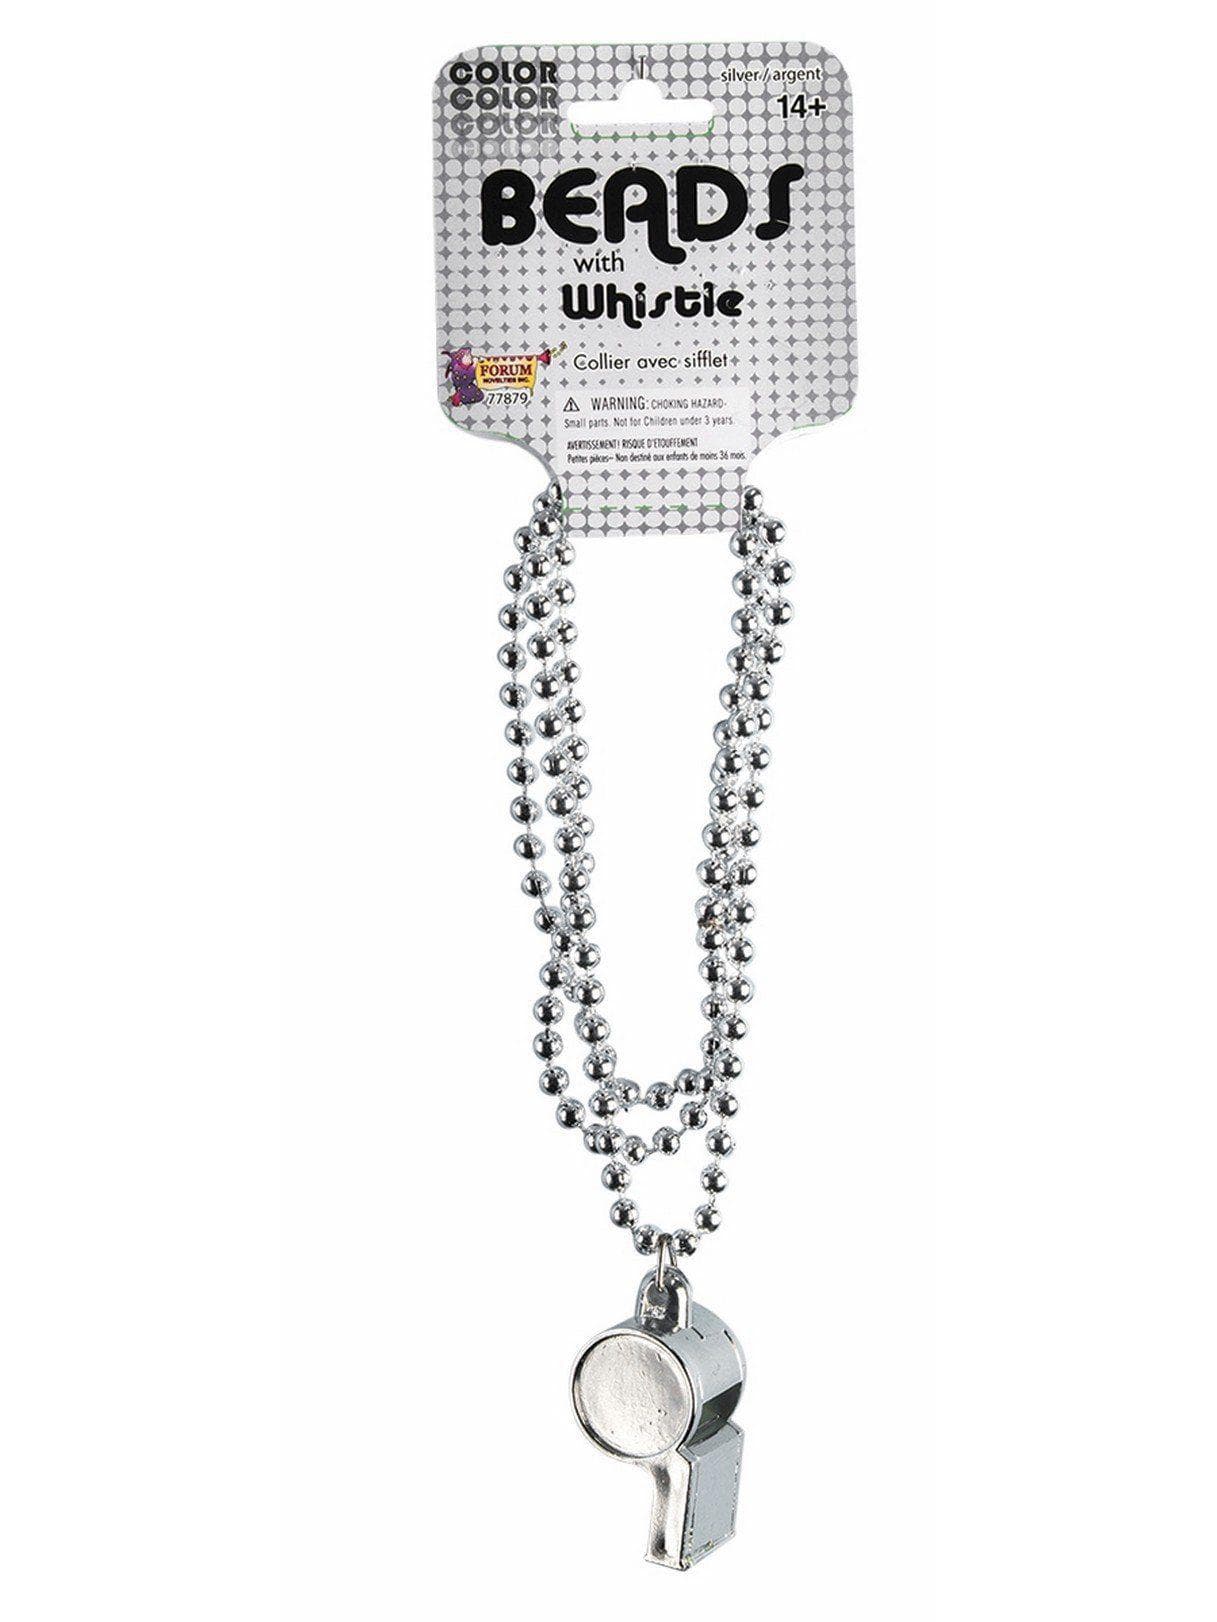 Adult Silver Bead Necklace with Whistle - costumes.com